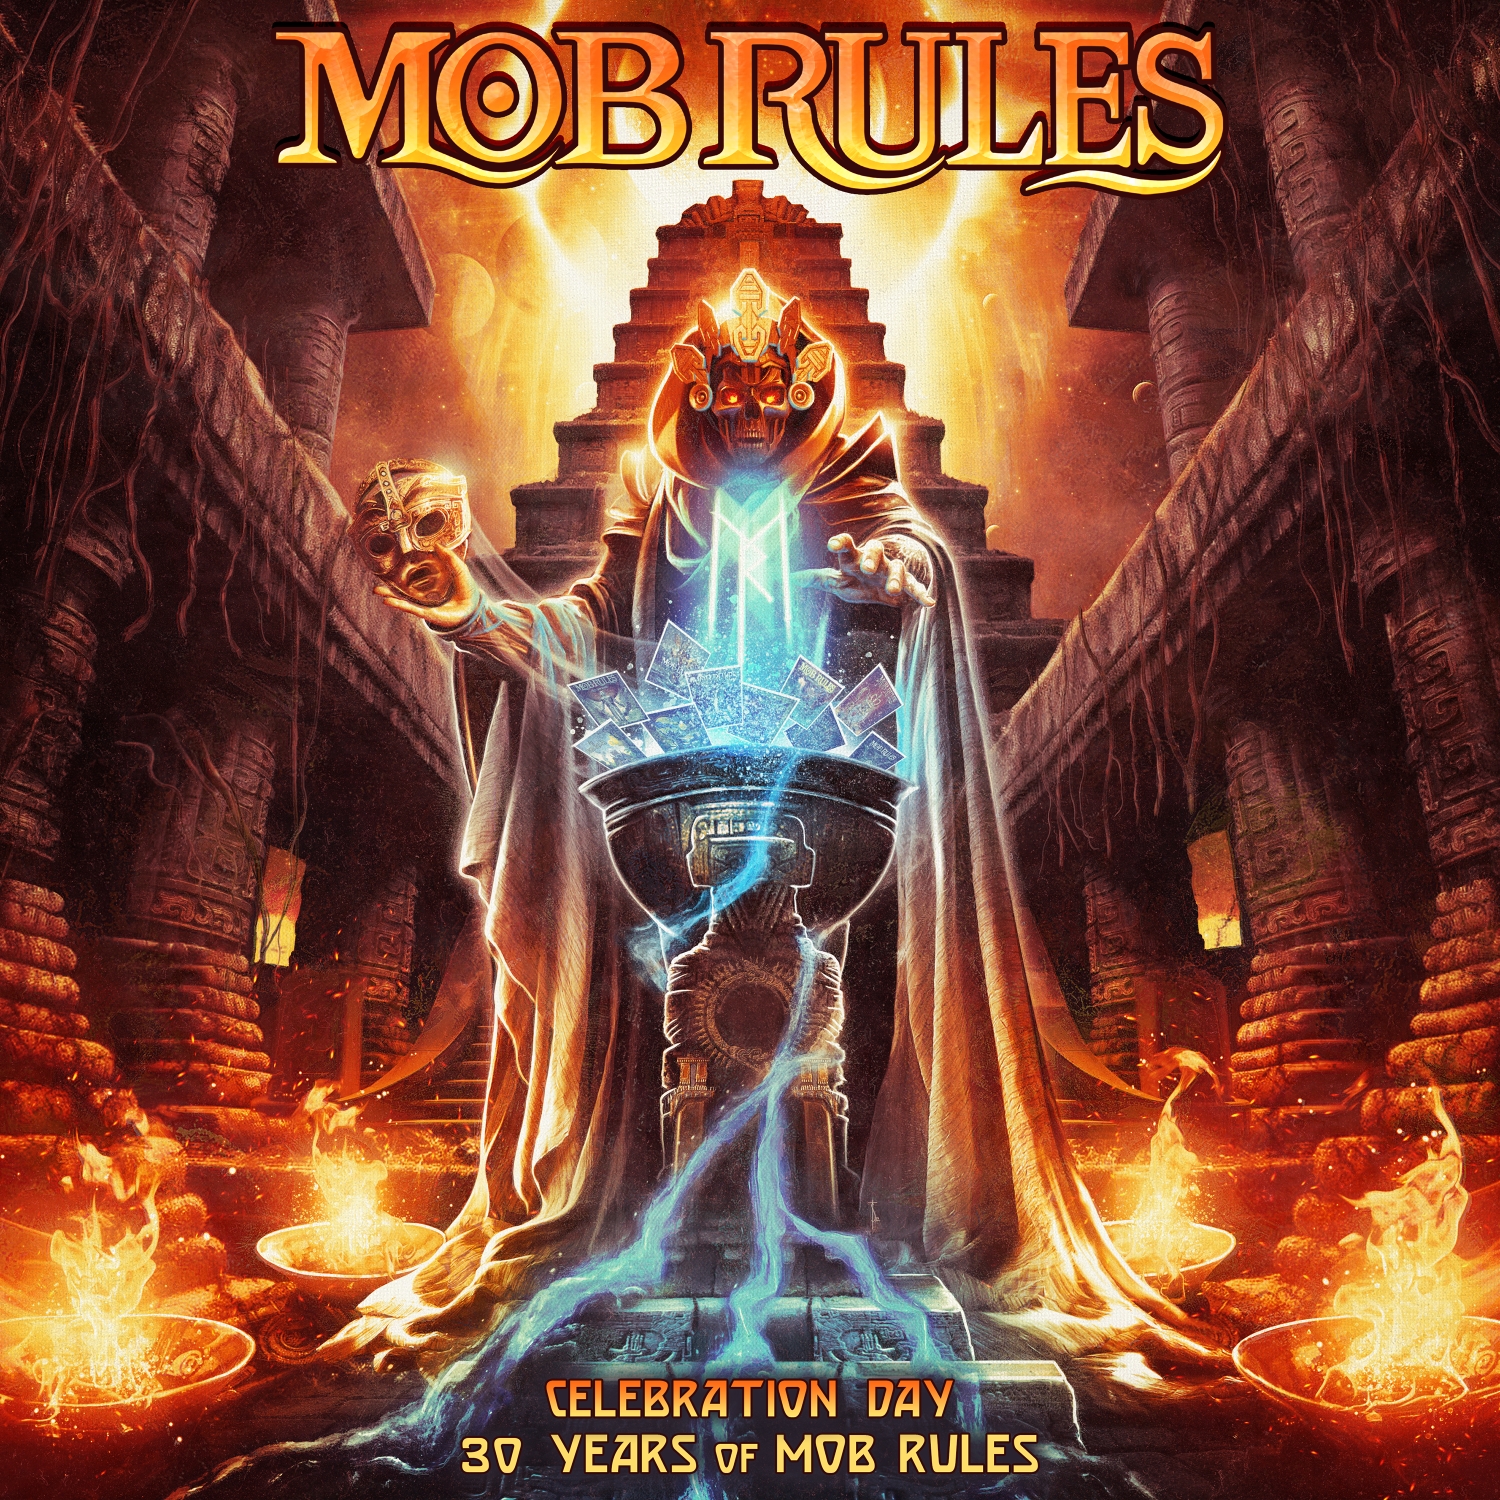 mob-rules-celebration-day-30-years-of-mob-rules-ein-album-review